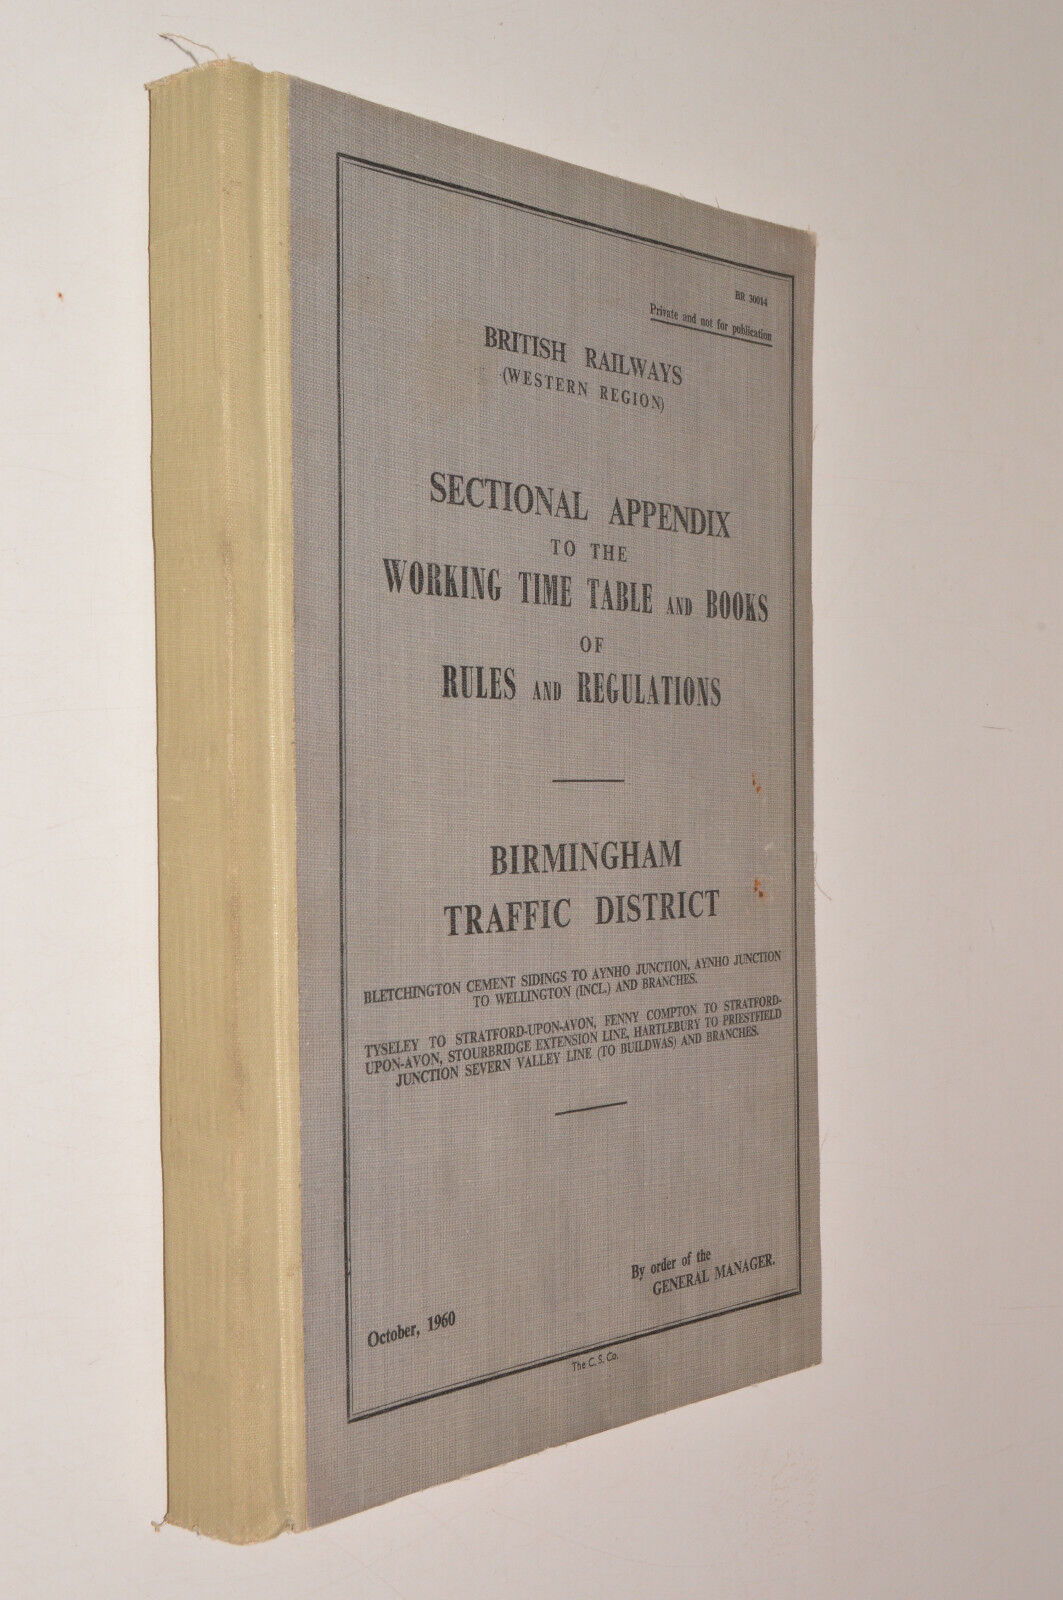 SECTIONAL APPENDIX TO THE WORKING TIME TABLE - BIRMINGHAM DISTRICT 1960